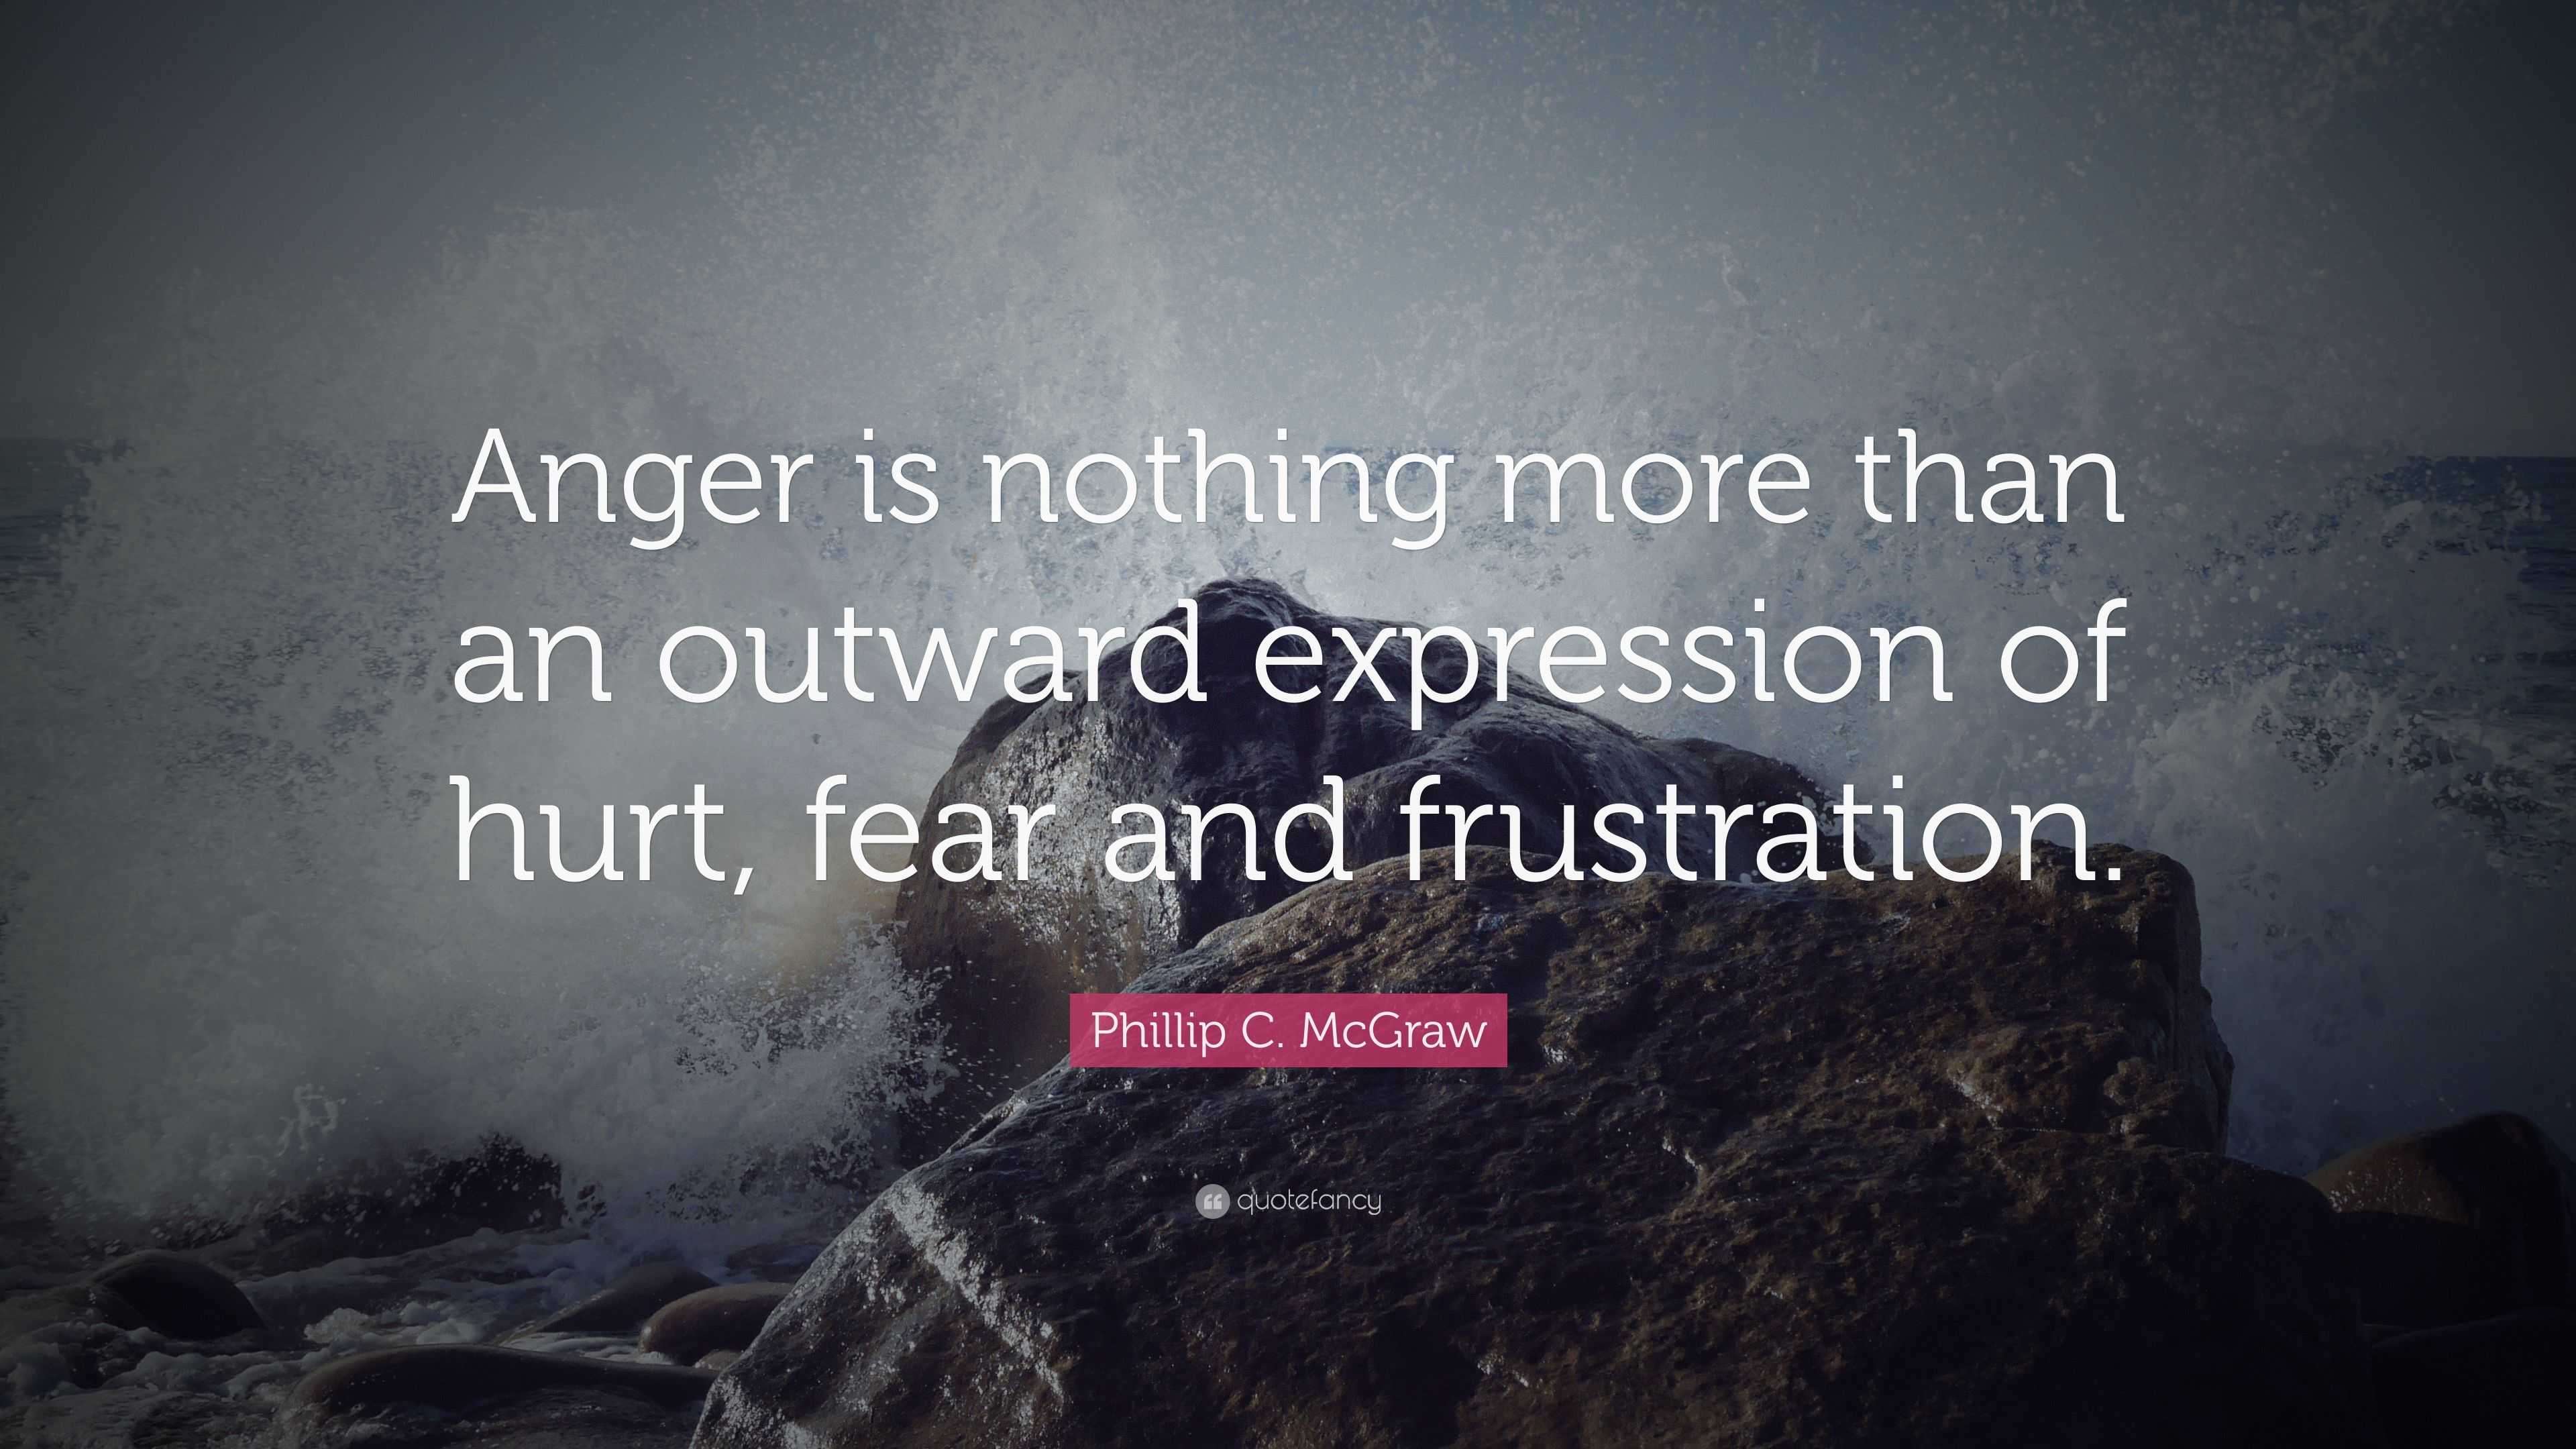 Phillip C. McGraw Quote “Anger is nothing more than an